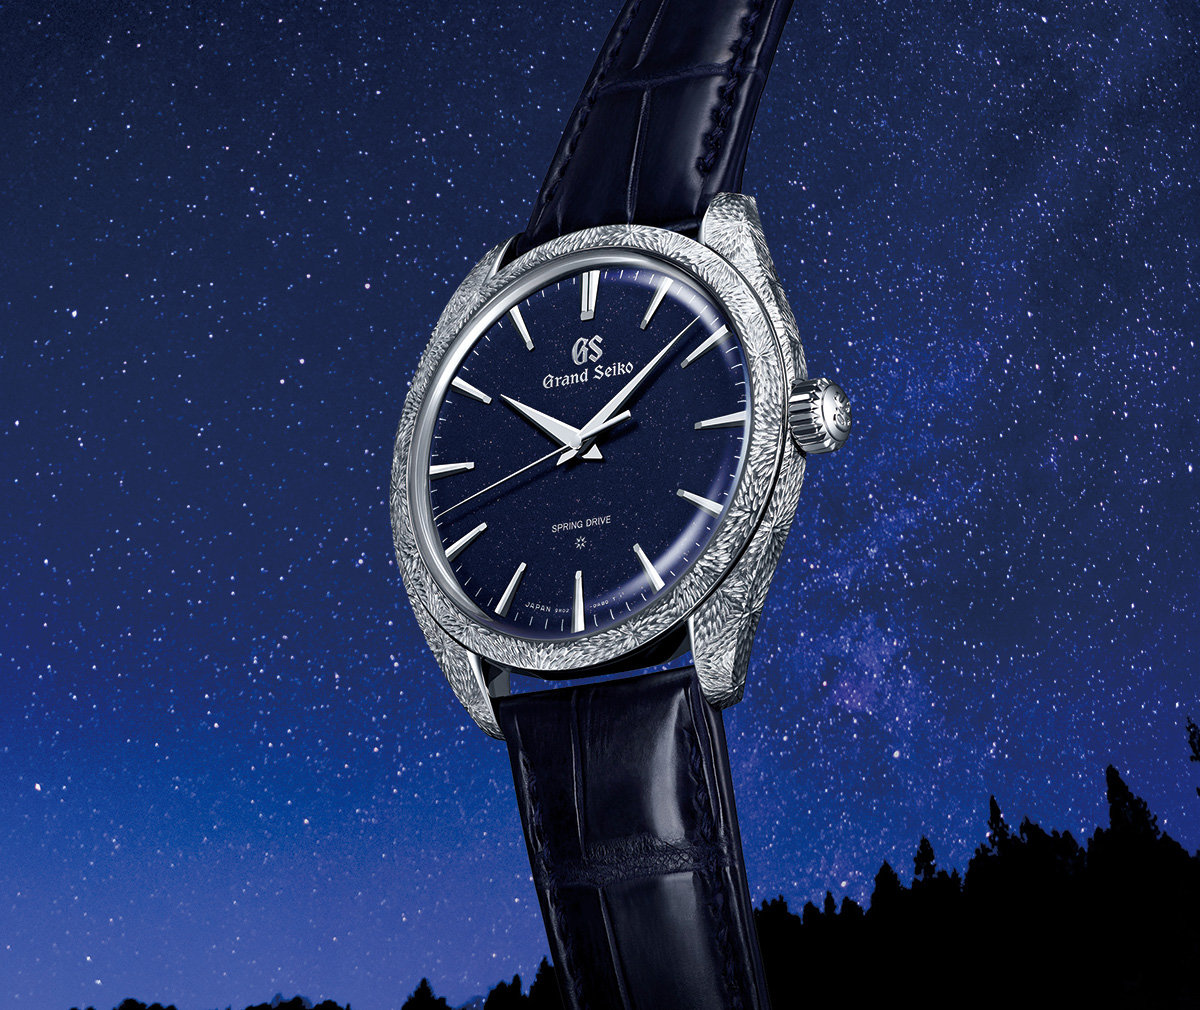 New: Seiko adds yet another masterpiece to their Anniversary Limited Edition - the SBGZ007 -